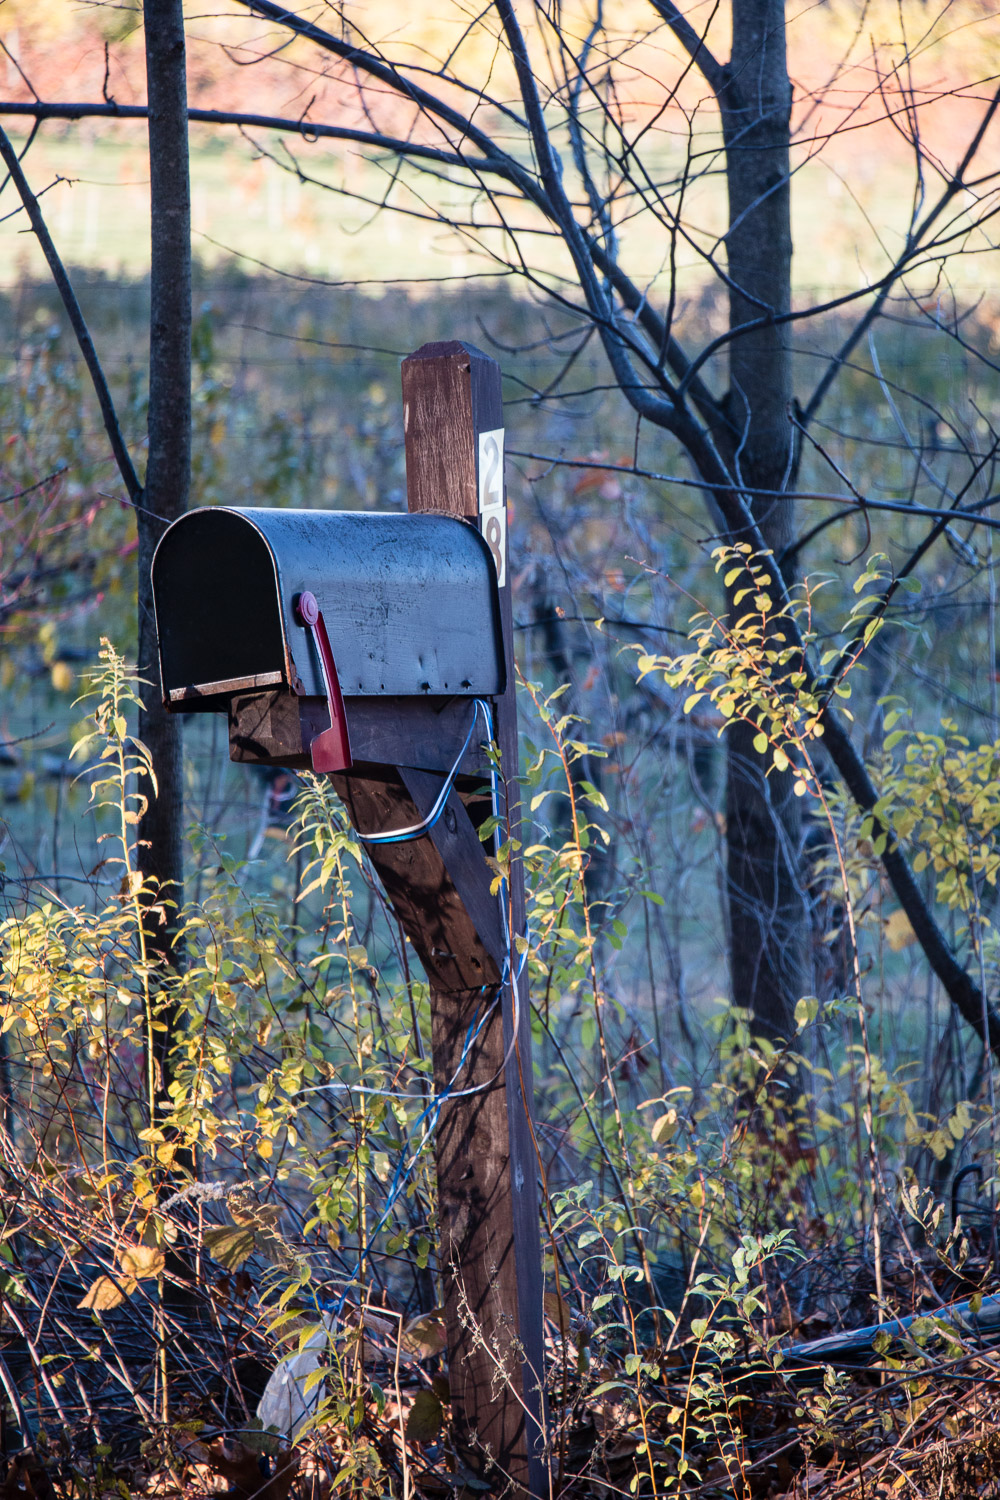 The mailbox mouse